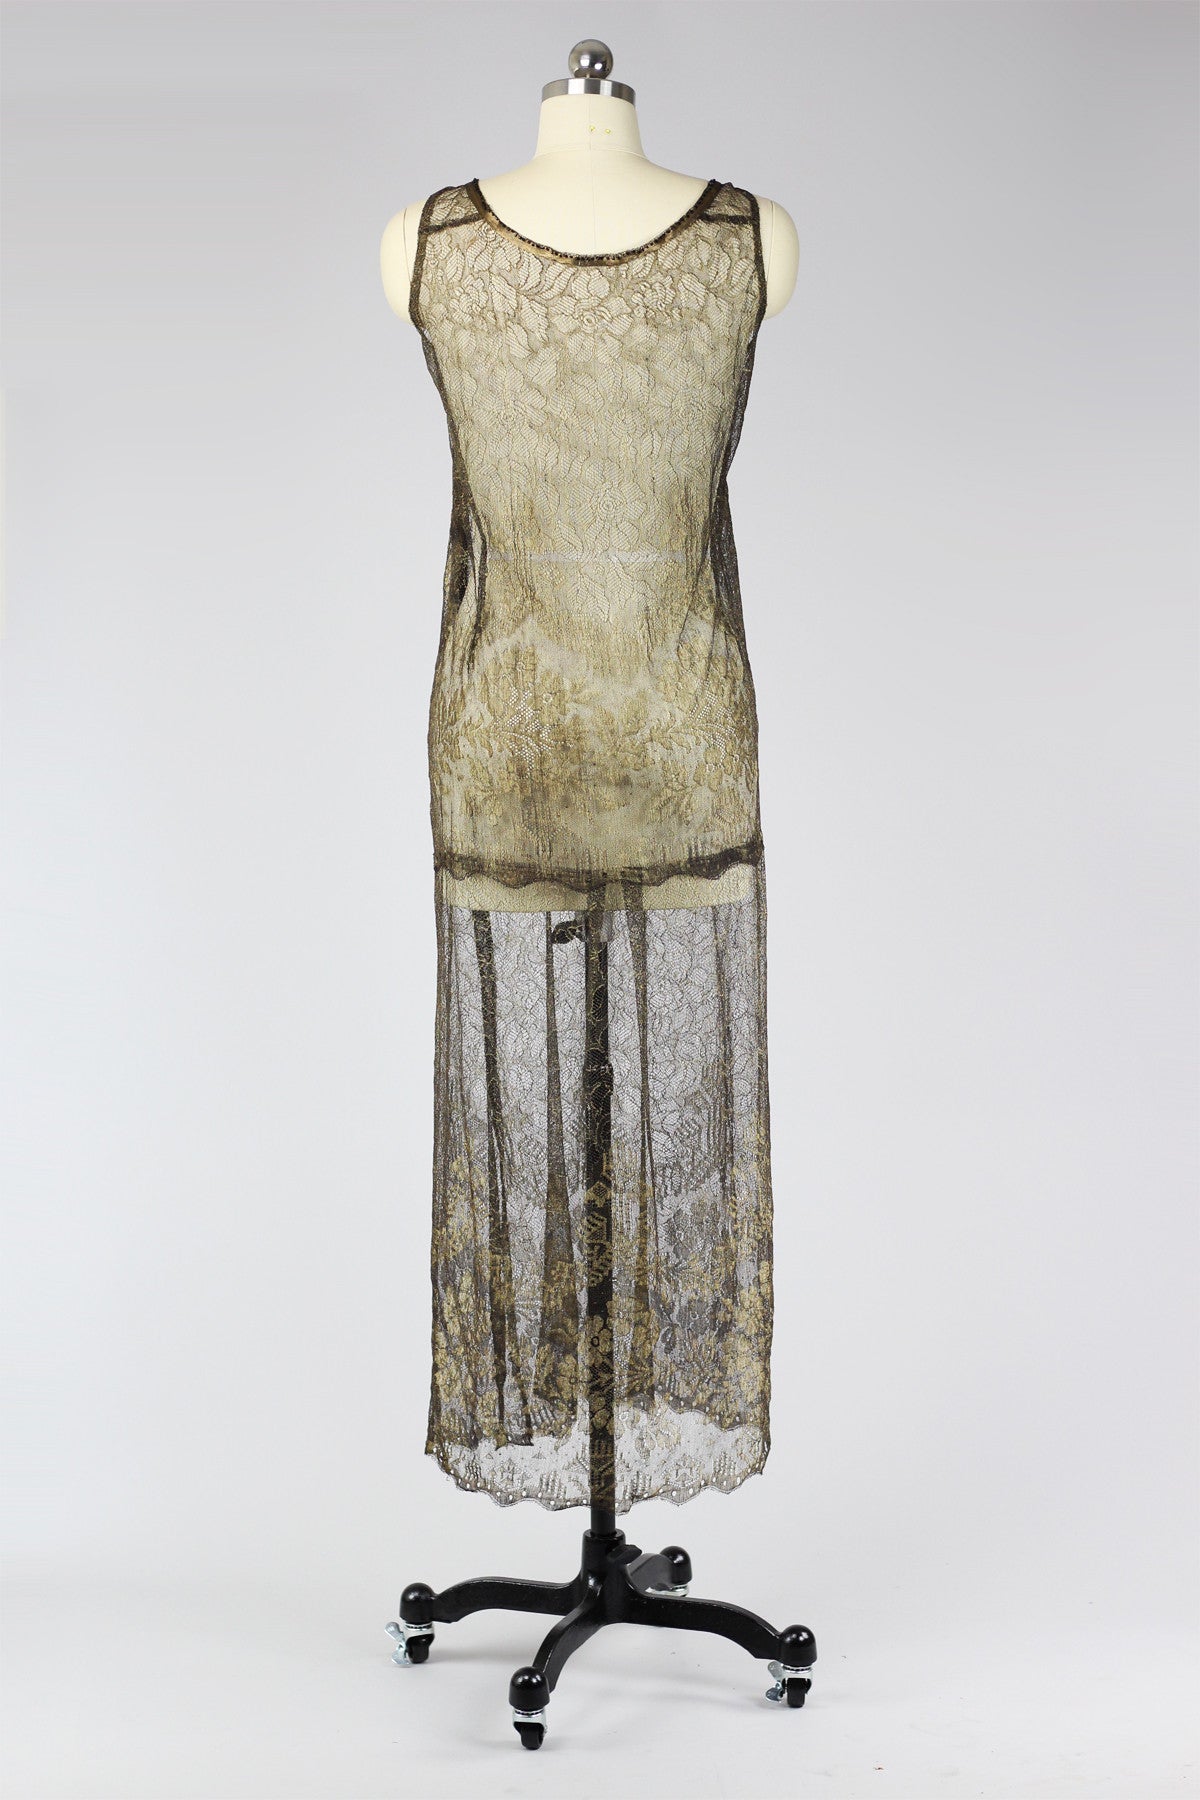 Rare 1920s Egyptian Revival Gold Metallic Lace and Lamé Dress